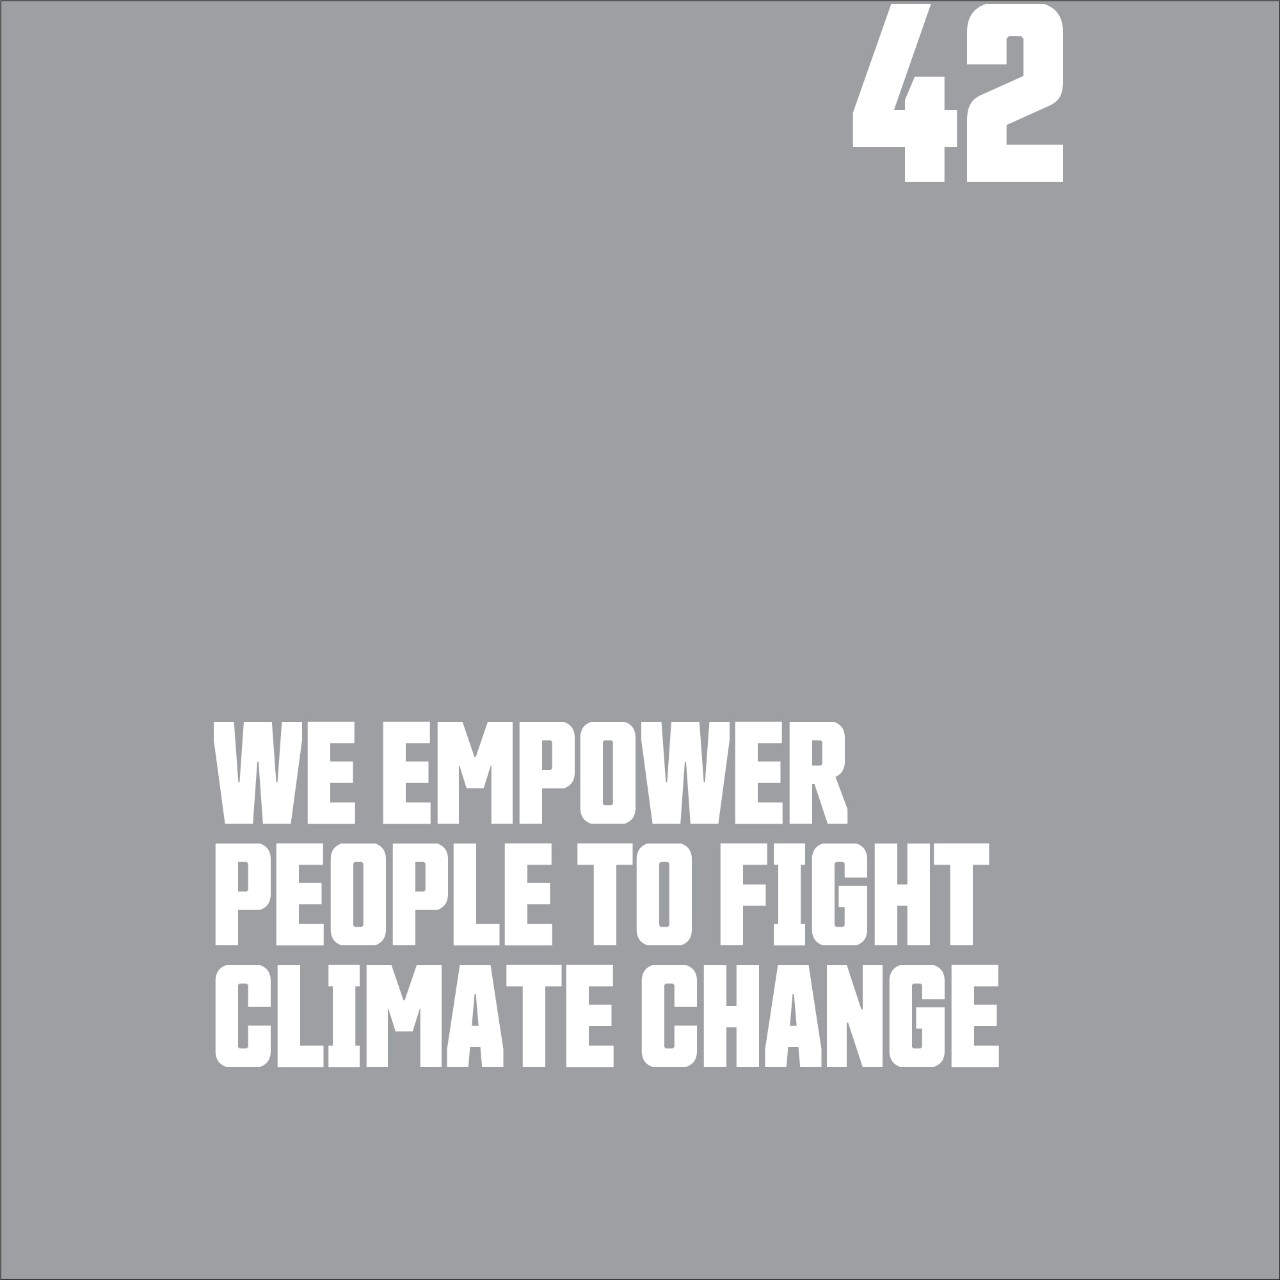 We Empower People to Fight Climate Change